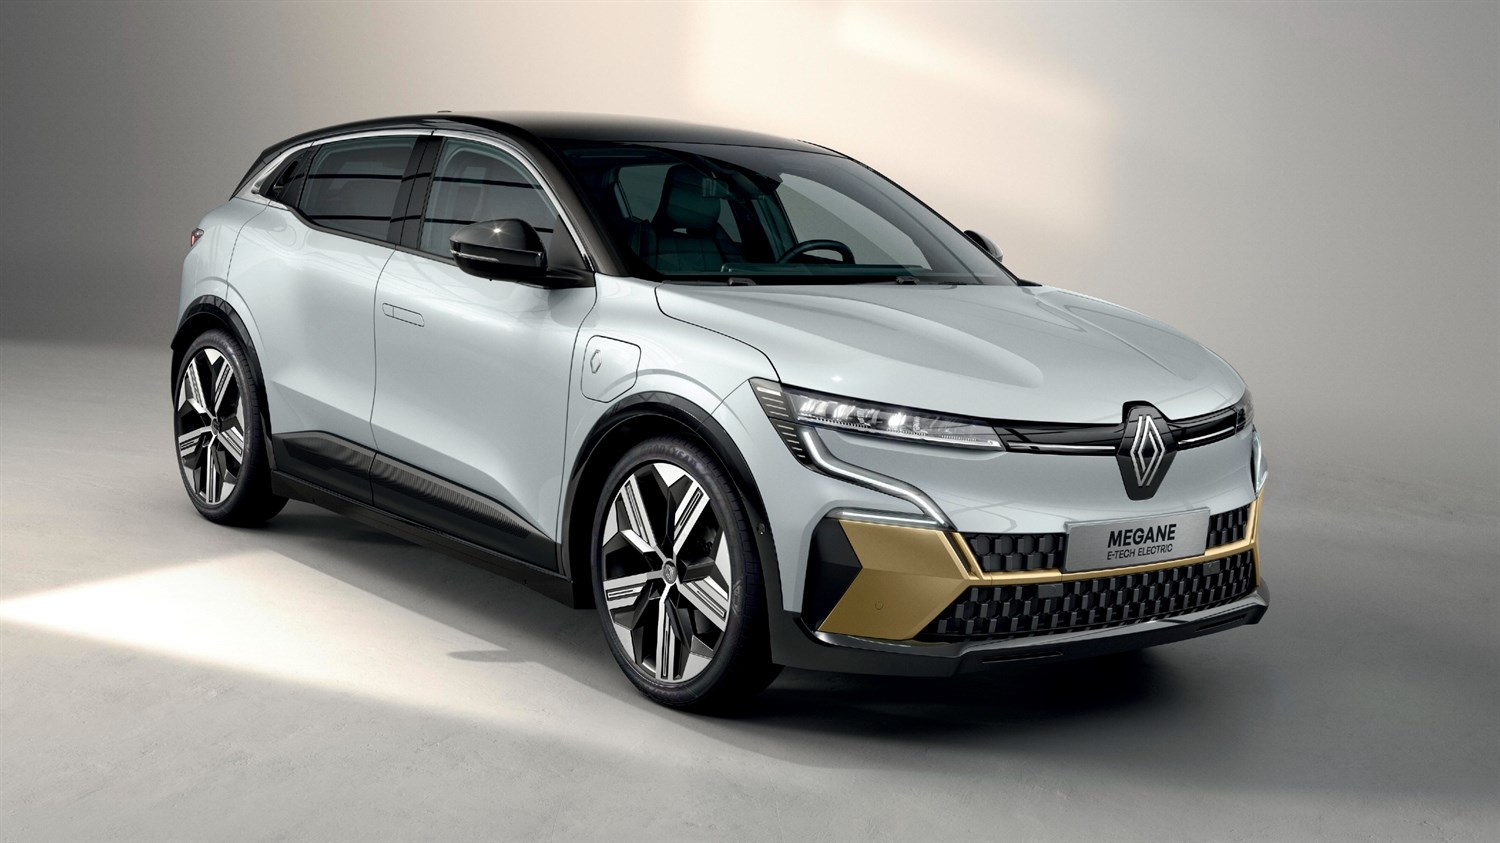 All-New Renault Megane E-Tech Electric unveiled at the IAA Munich